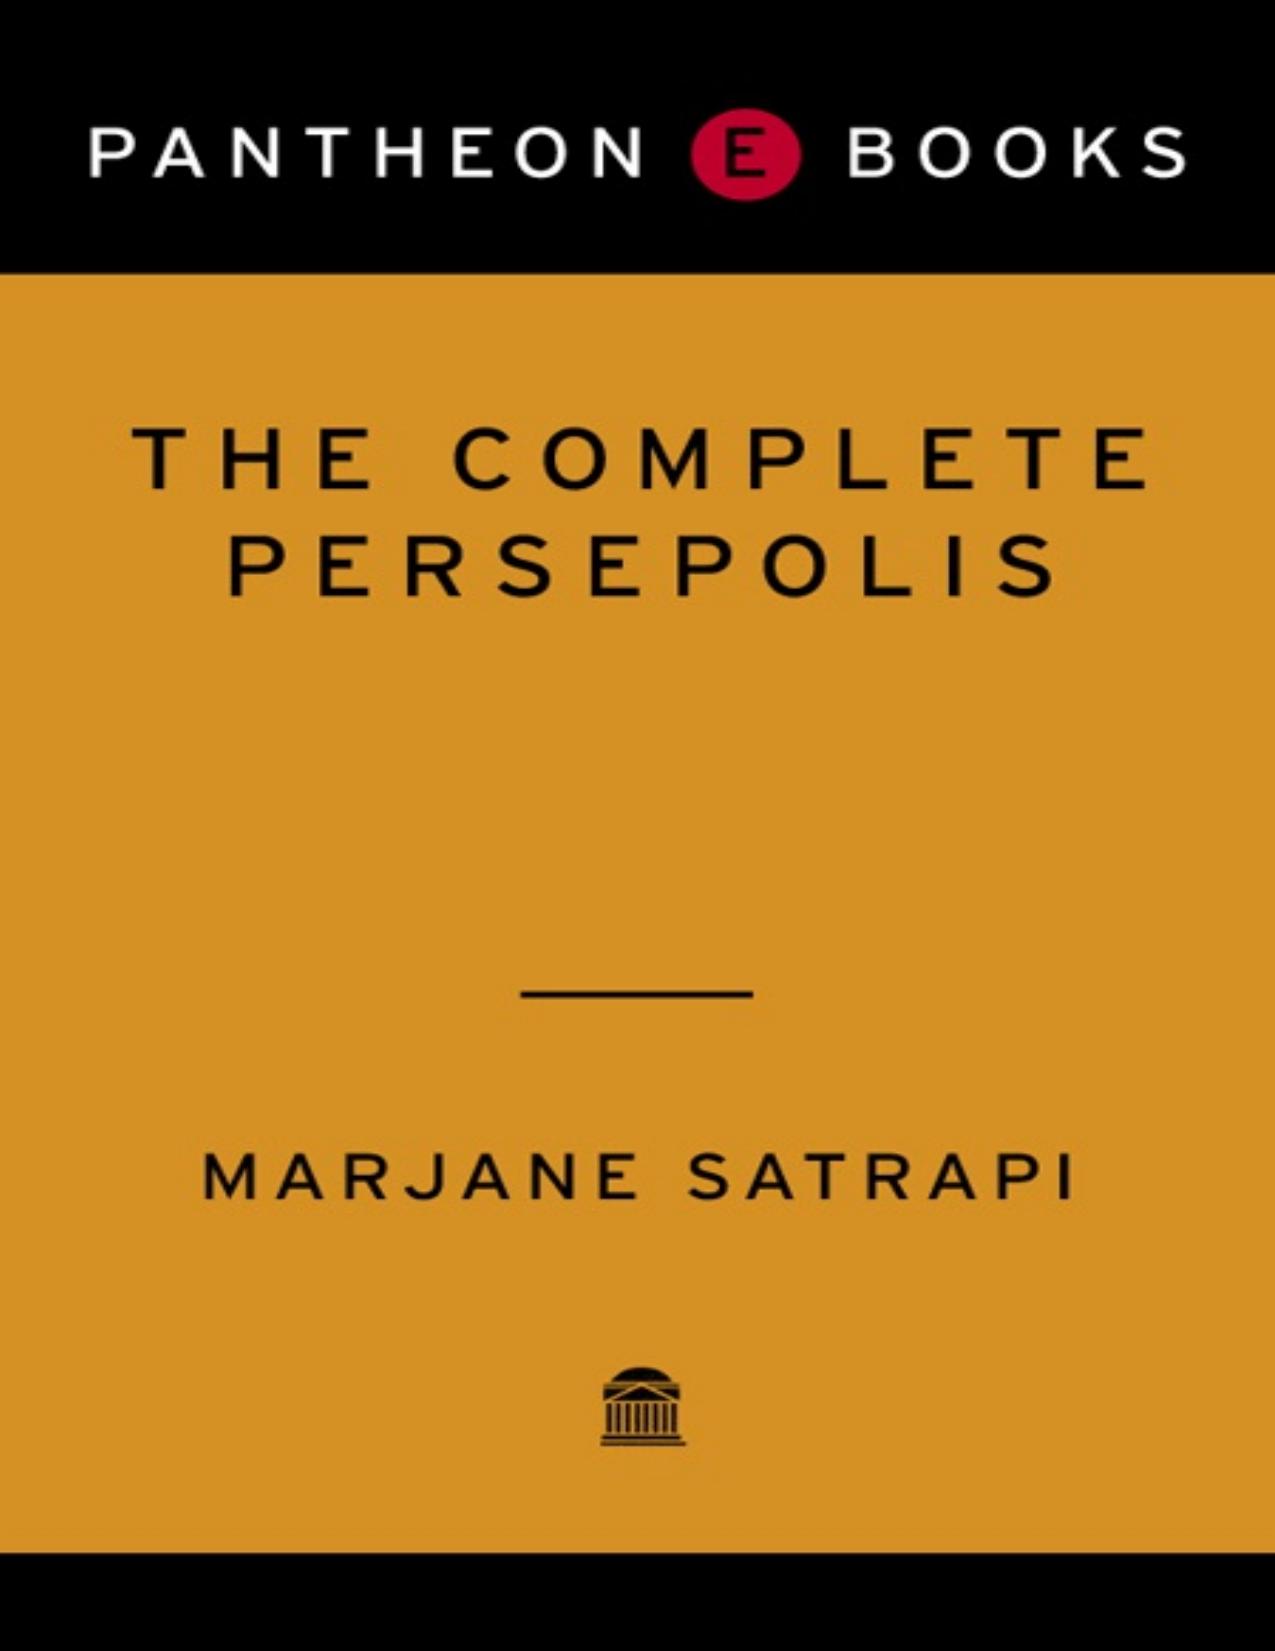 The Complete Persepolis by Marjane Satrapi